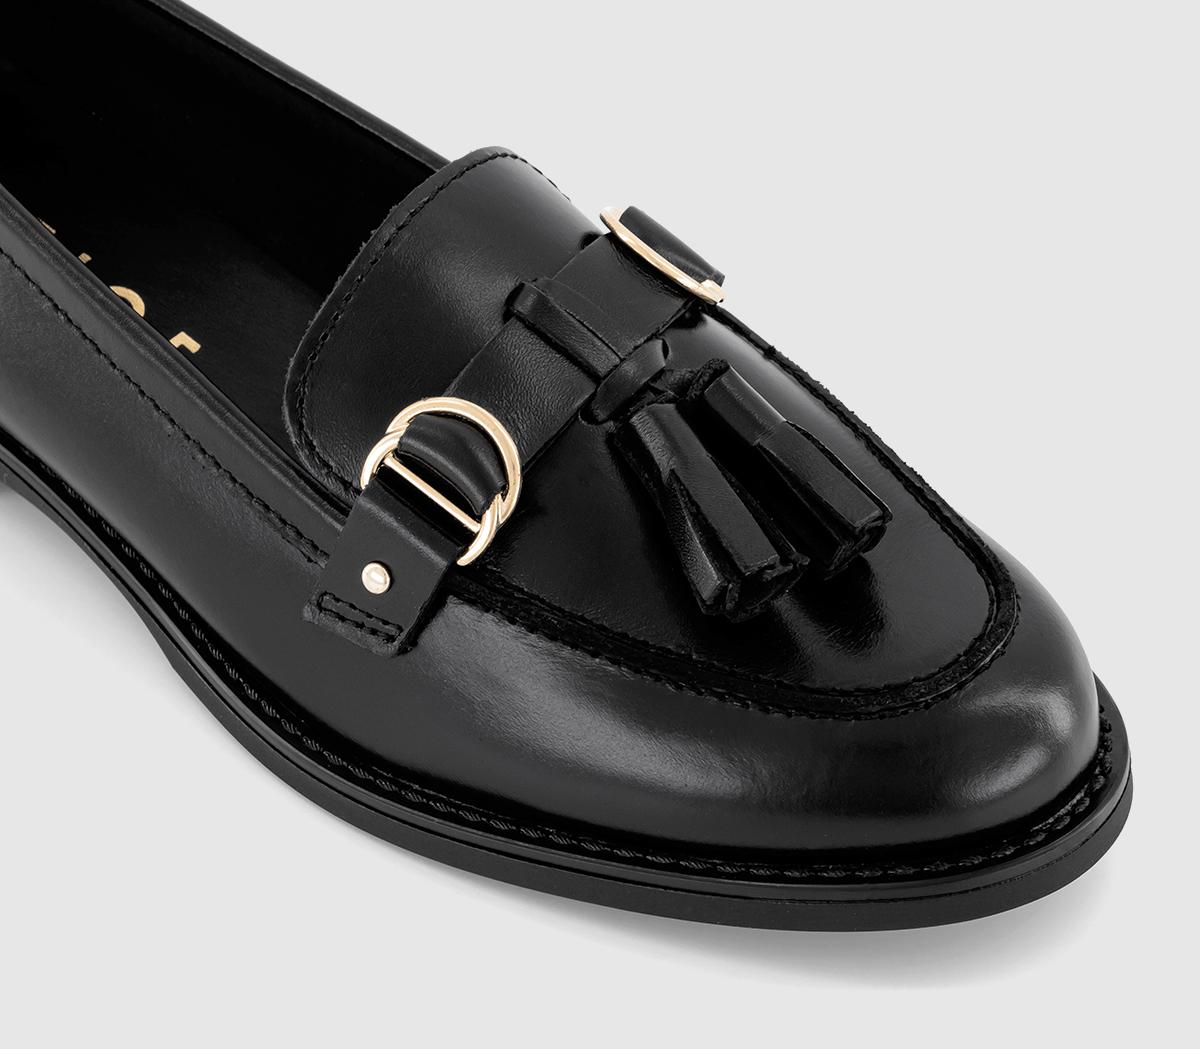 OFFICE Feels Leather Trim Tassel Loafer Black Leather - Flat Shoes for ...